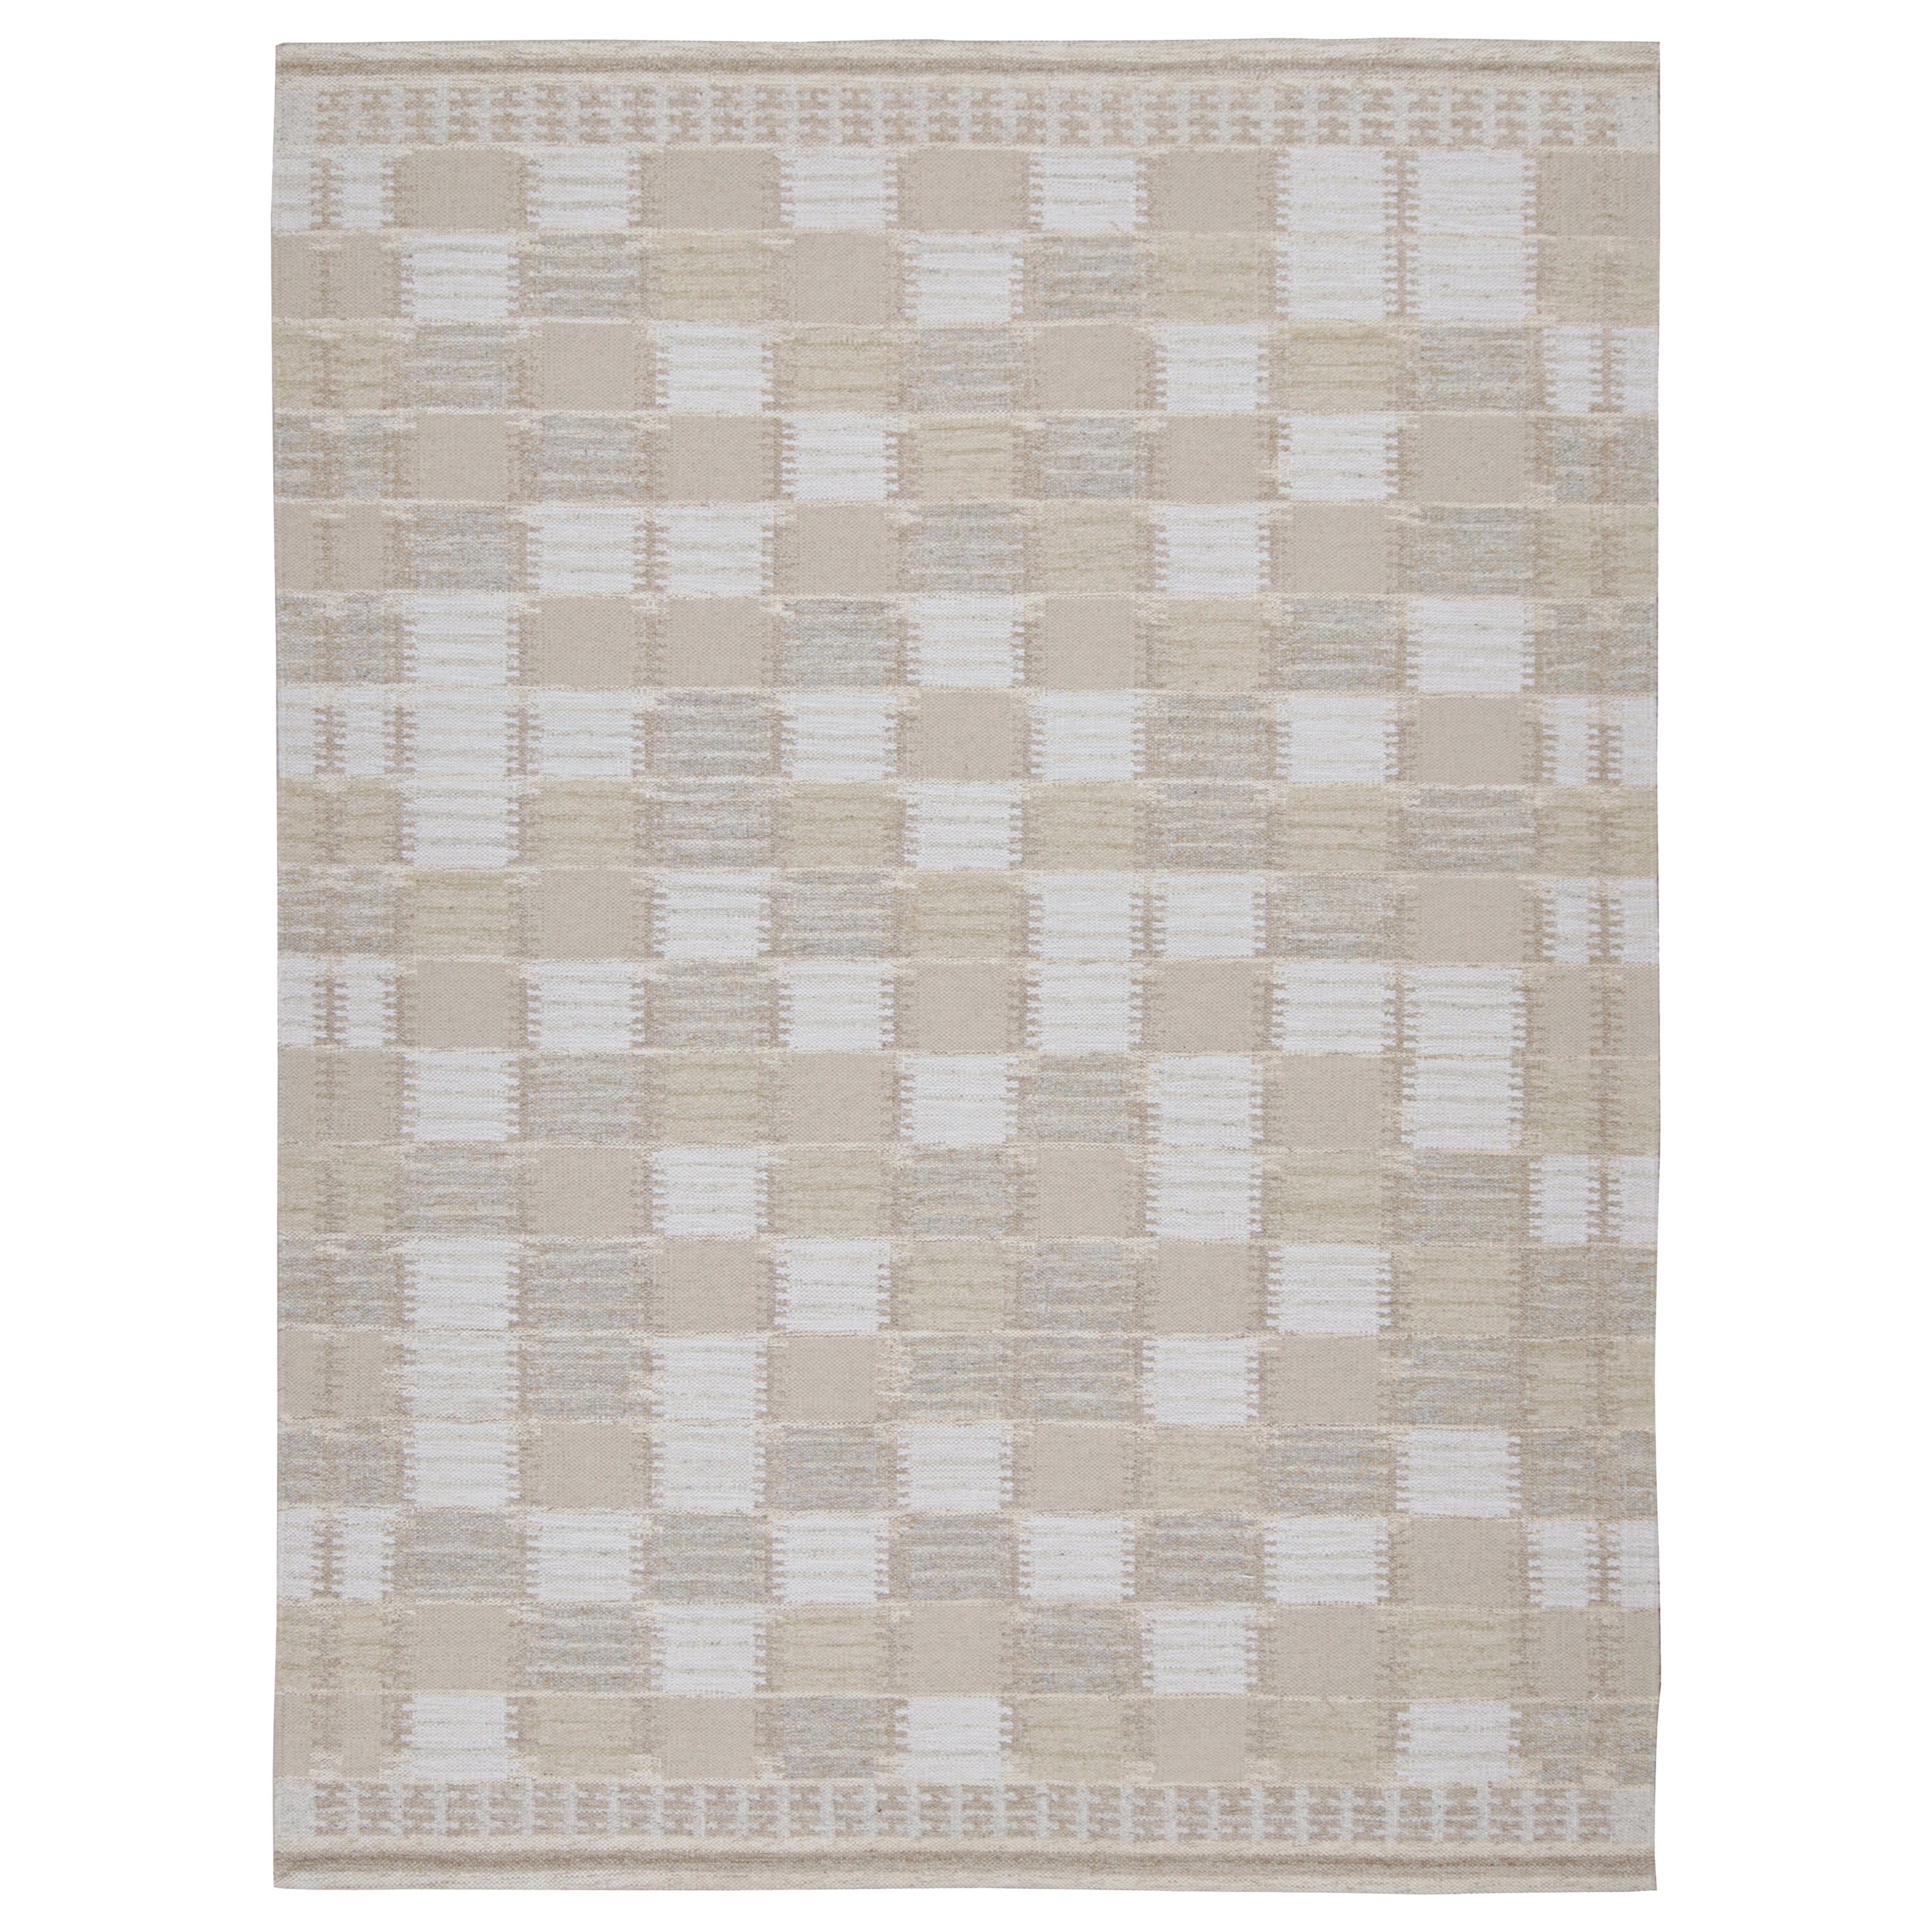 Rug & Kilim’s Scandinavian Style Kilim Rug in Taupe & Blue Geometric Patterns For Sale